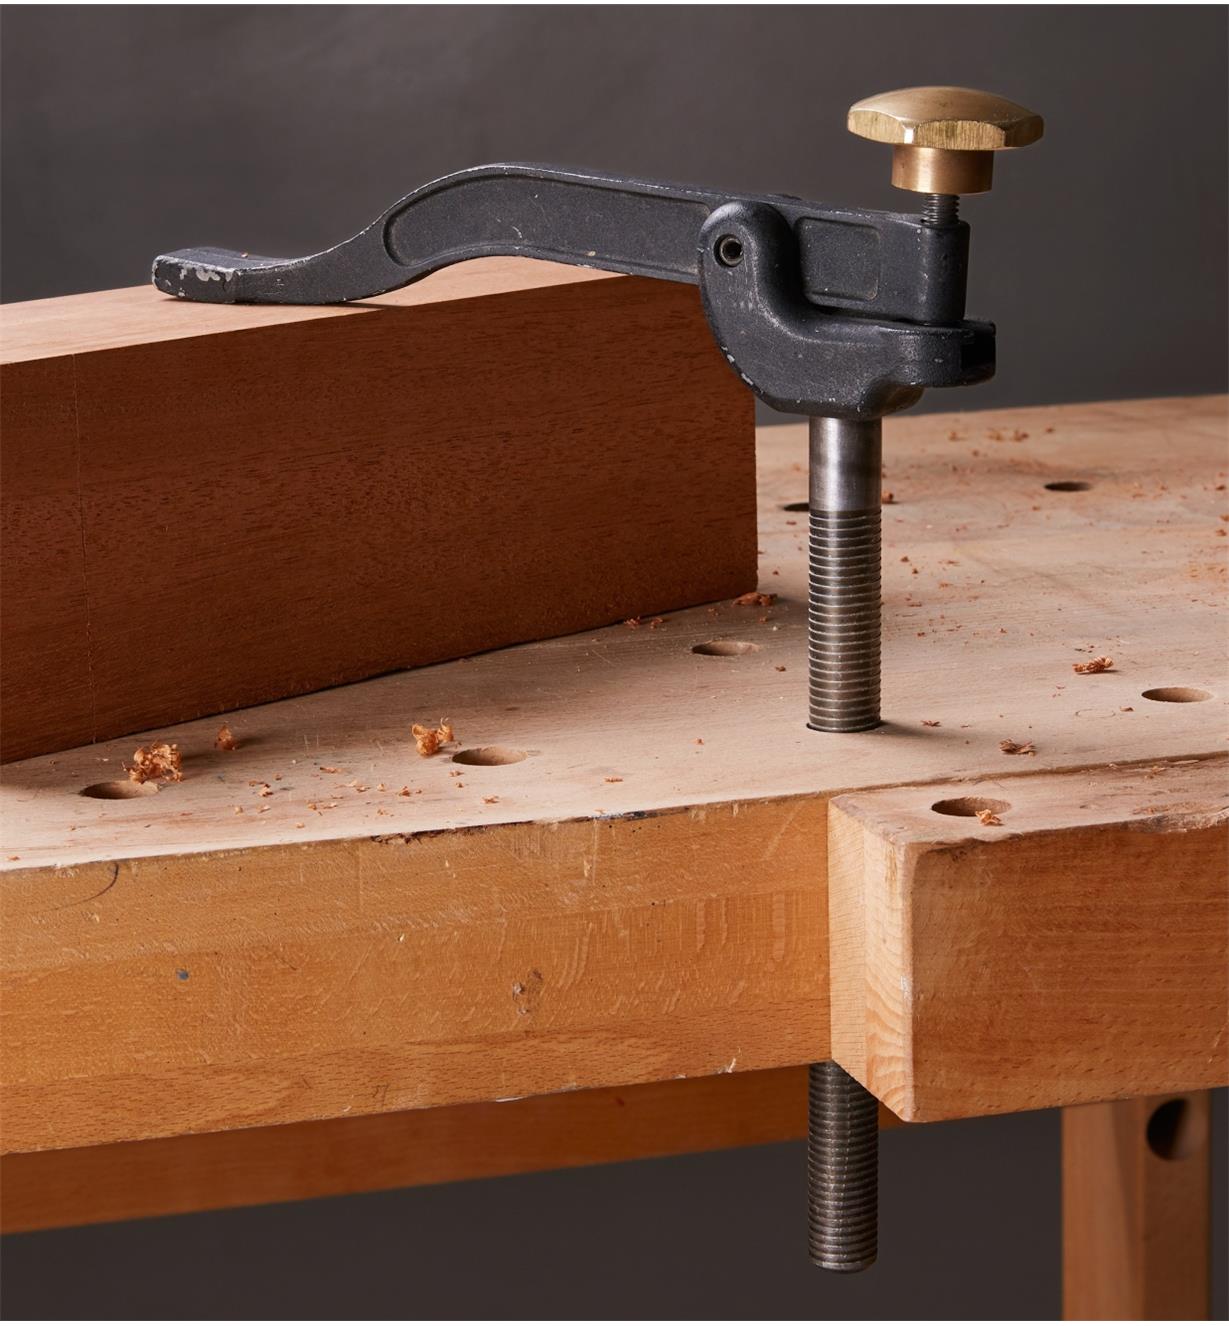 Veritas Hold-Down clamping a wood block on a workbench